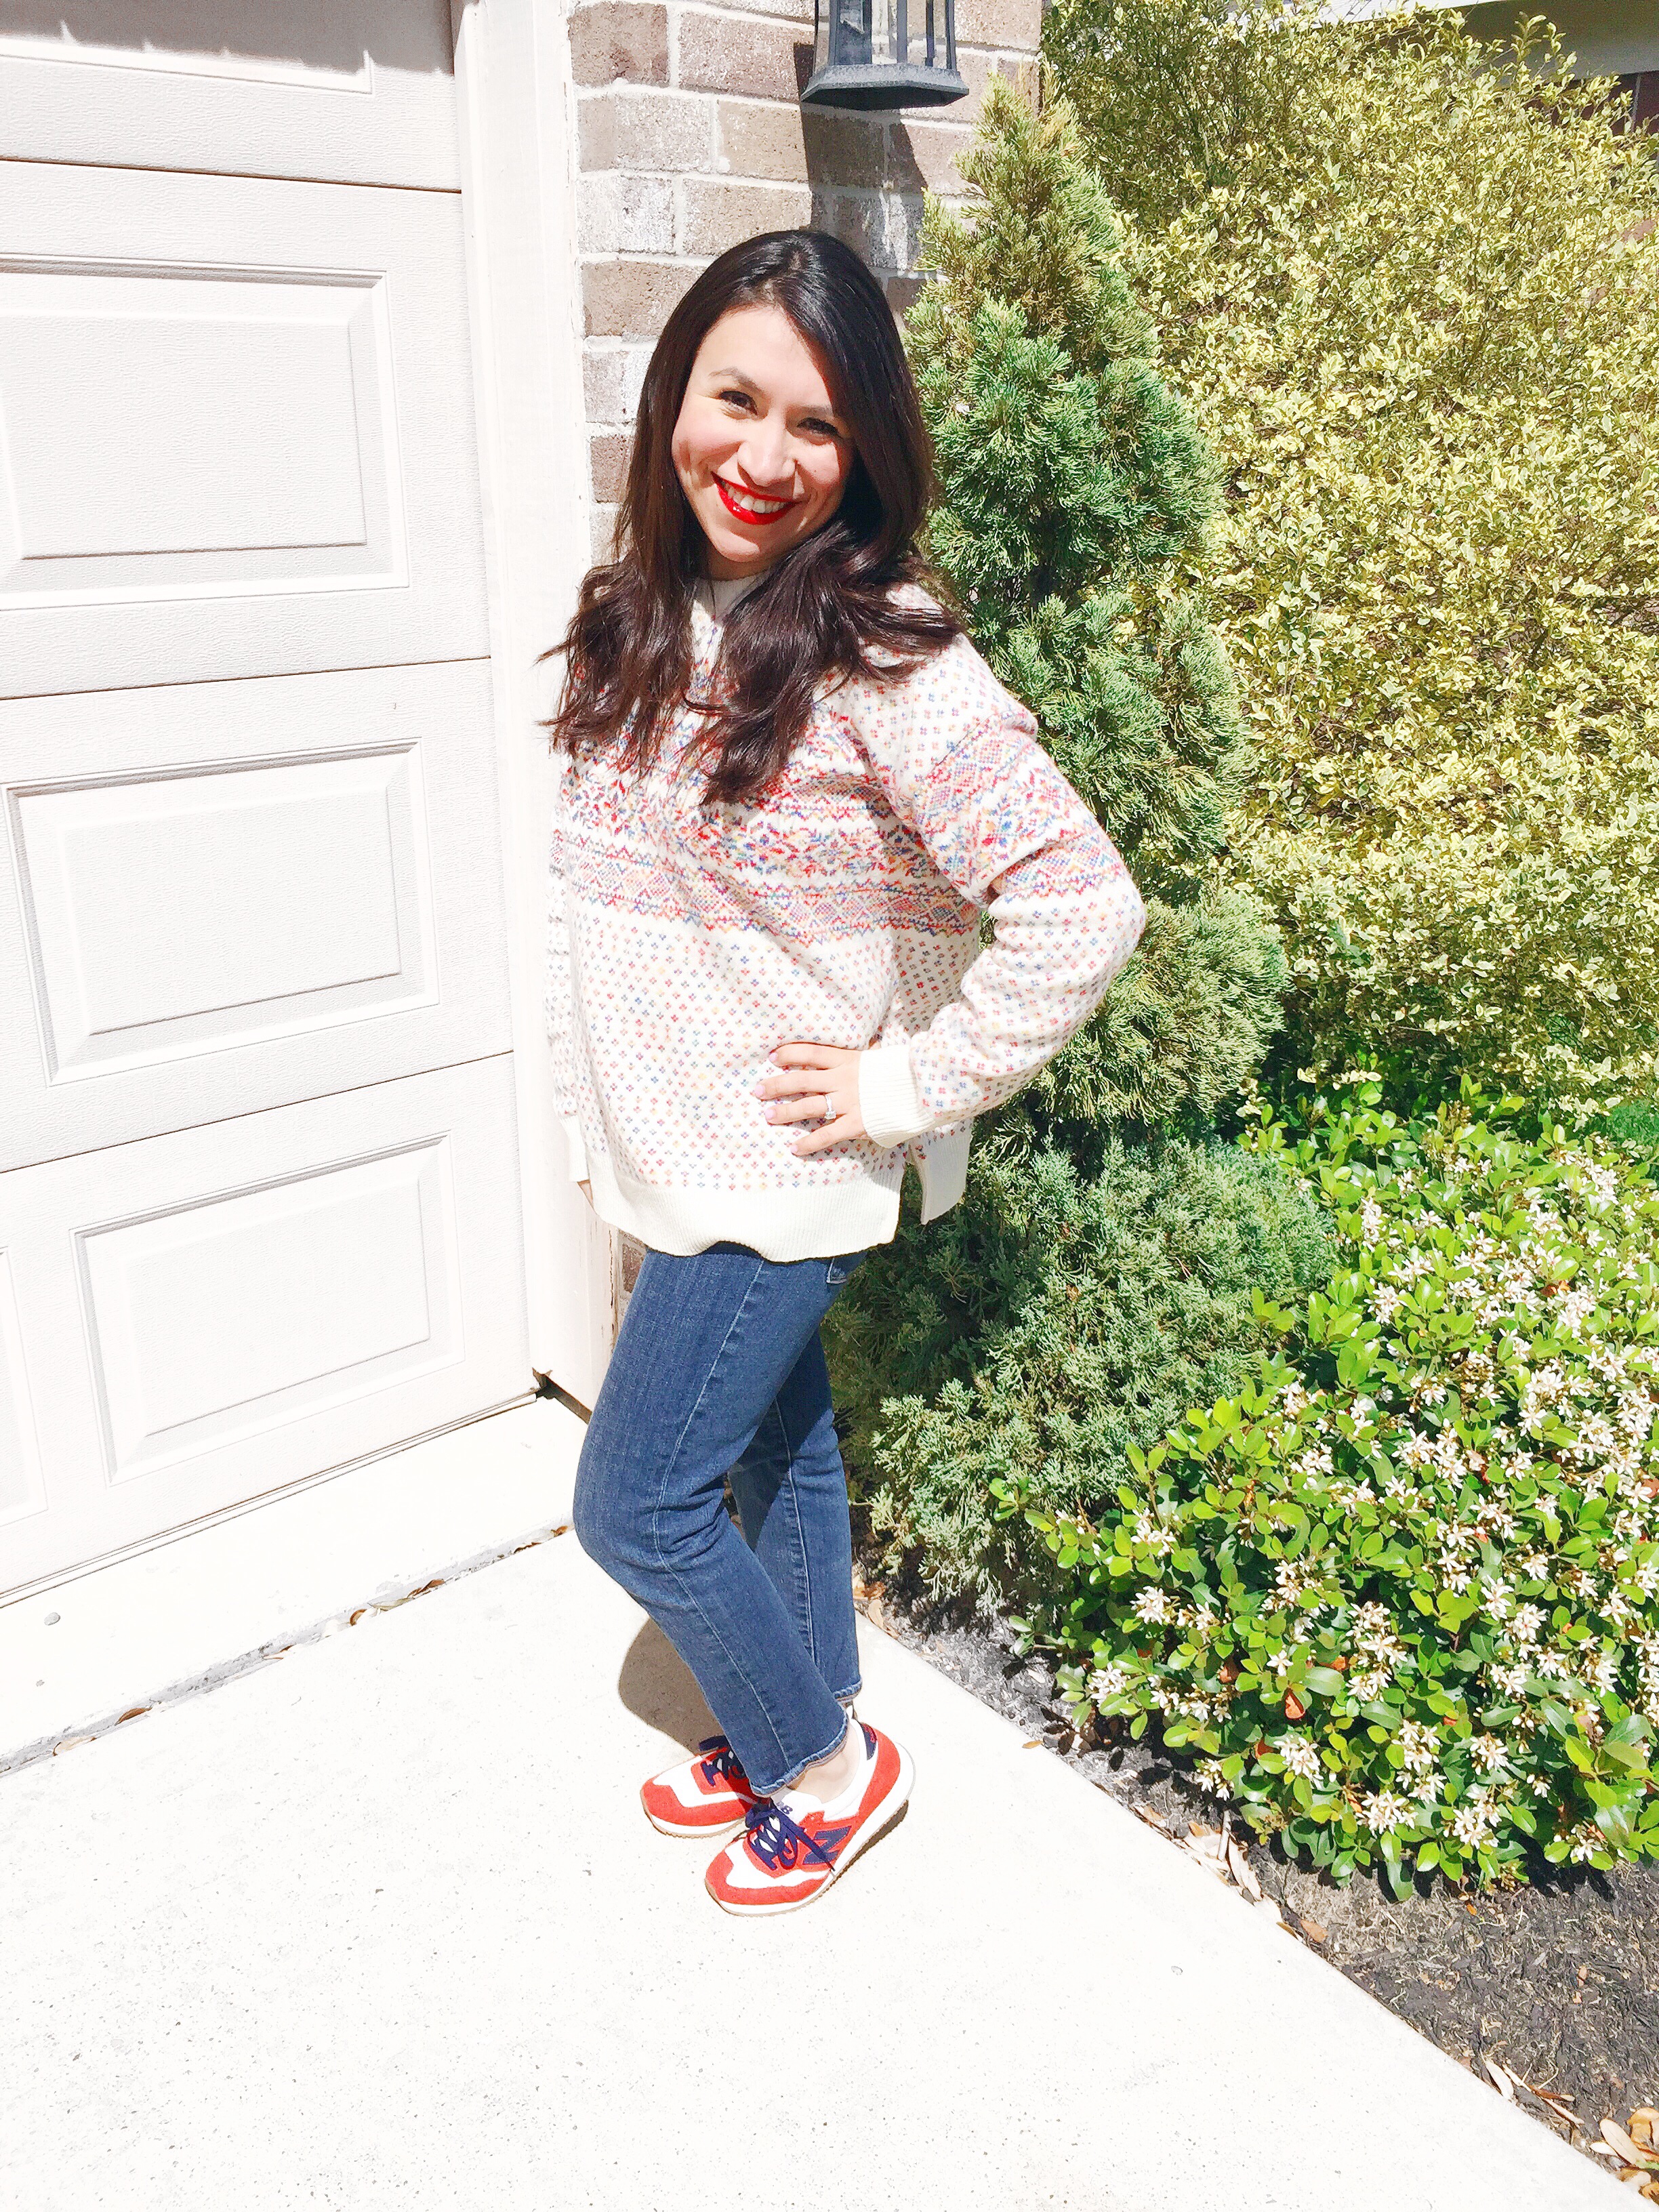 J.Crew Fiesta Sweater styled with tennis shoes